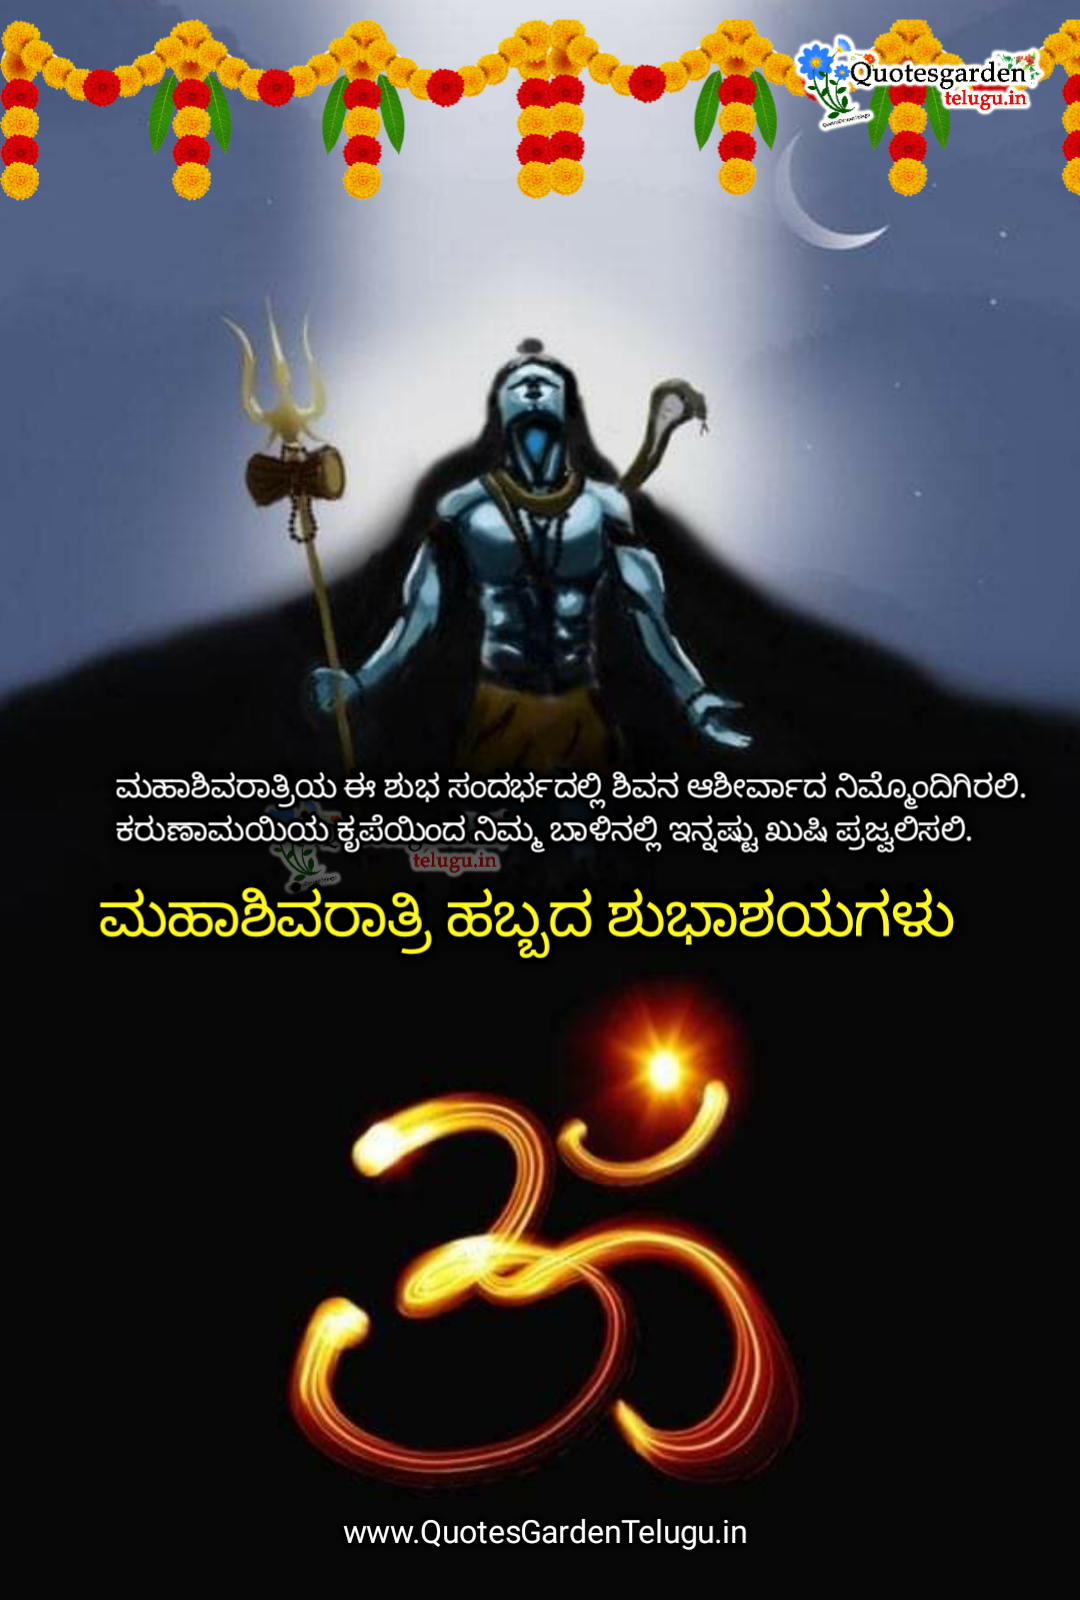 latest shivatri 2021 quotes sms free download in kannada ...